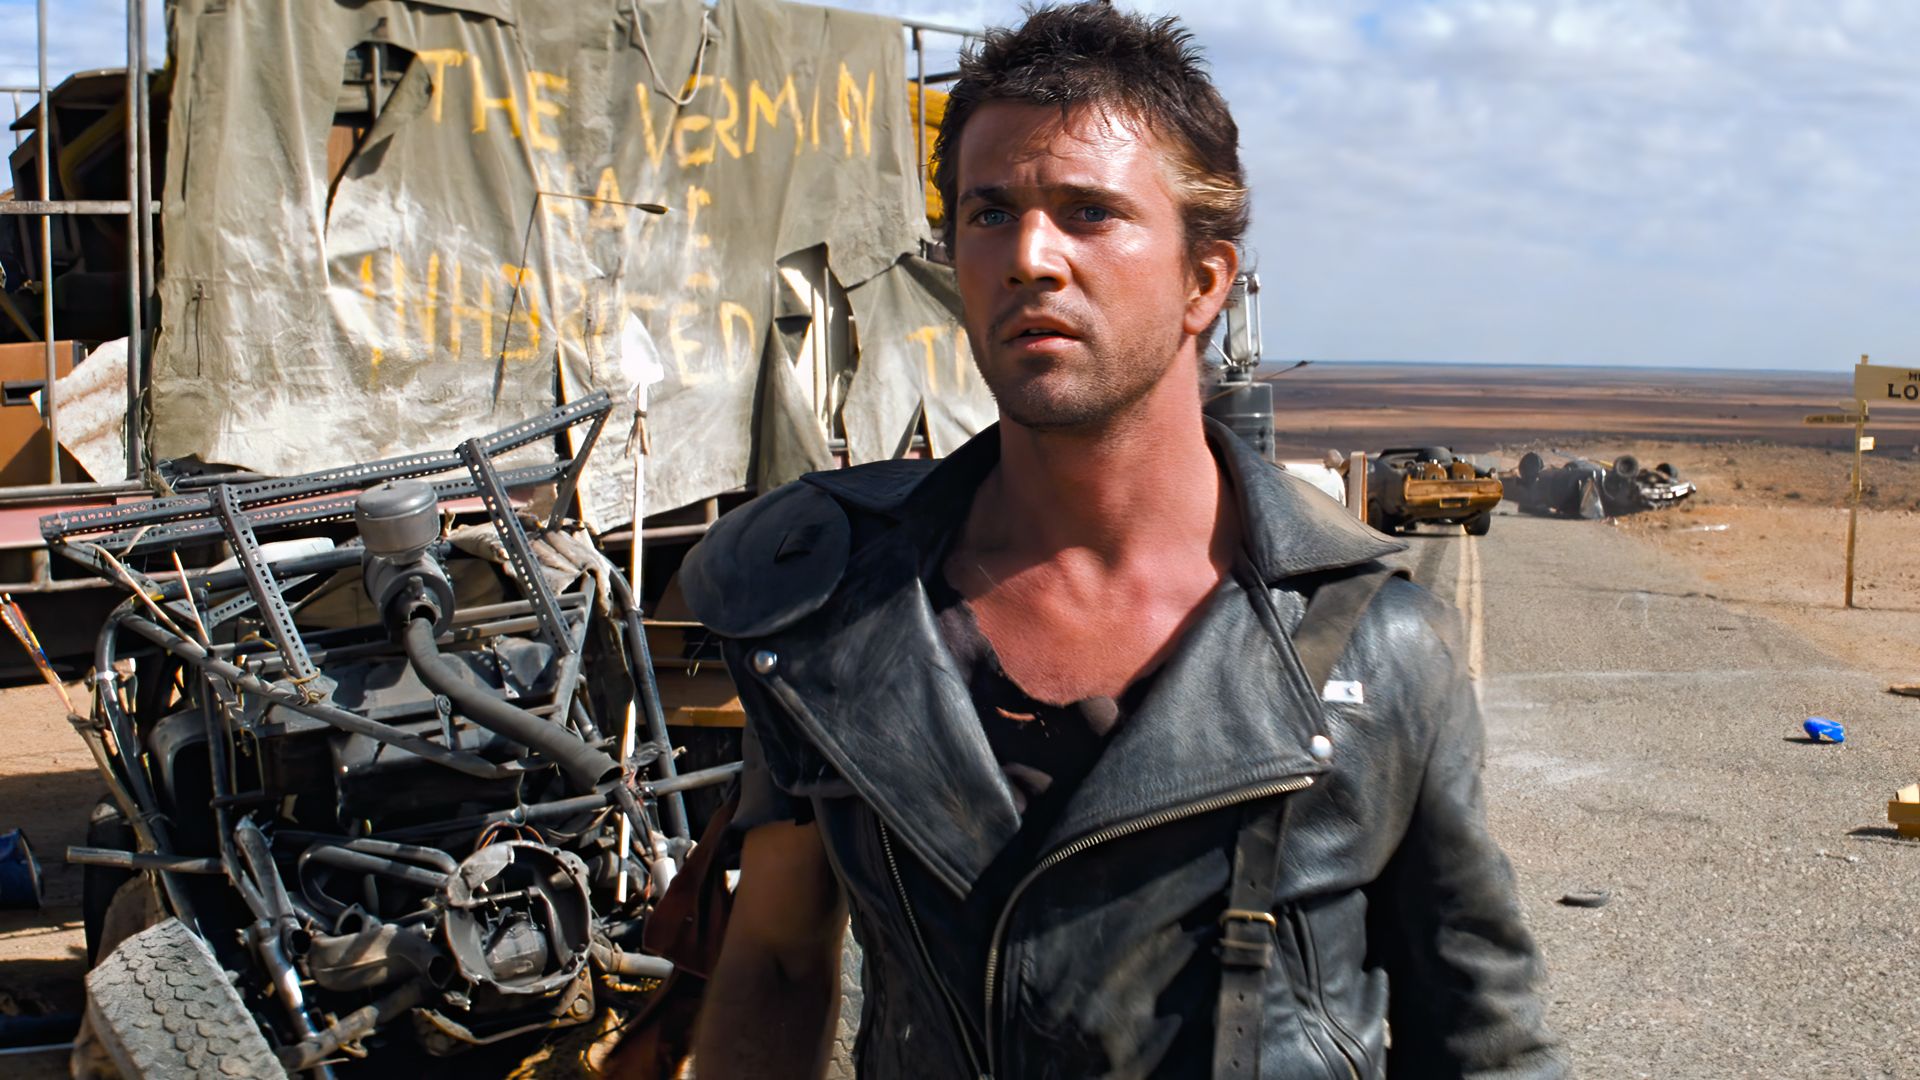 Mad Max The Road Warrior Movies Film Stills Road Mel Gibson Actor Apocalyptic Men Car Leather Jacket 1920x1080